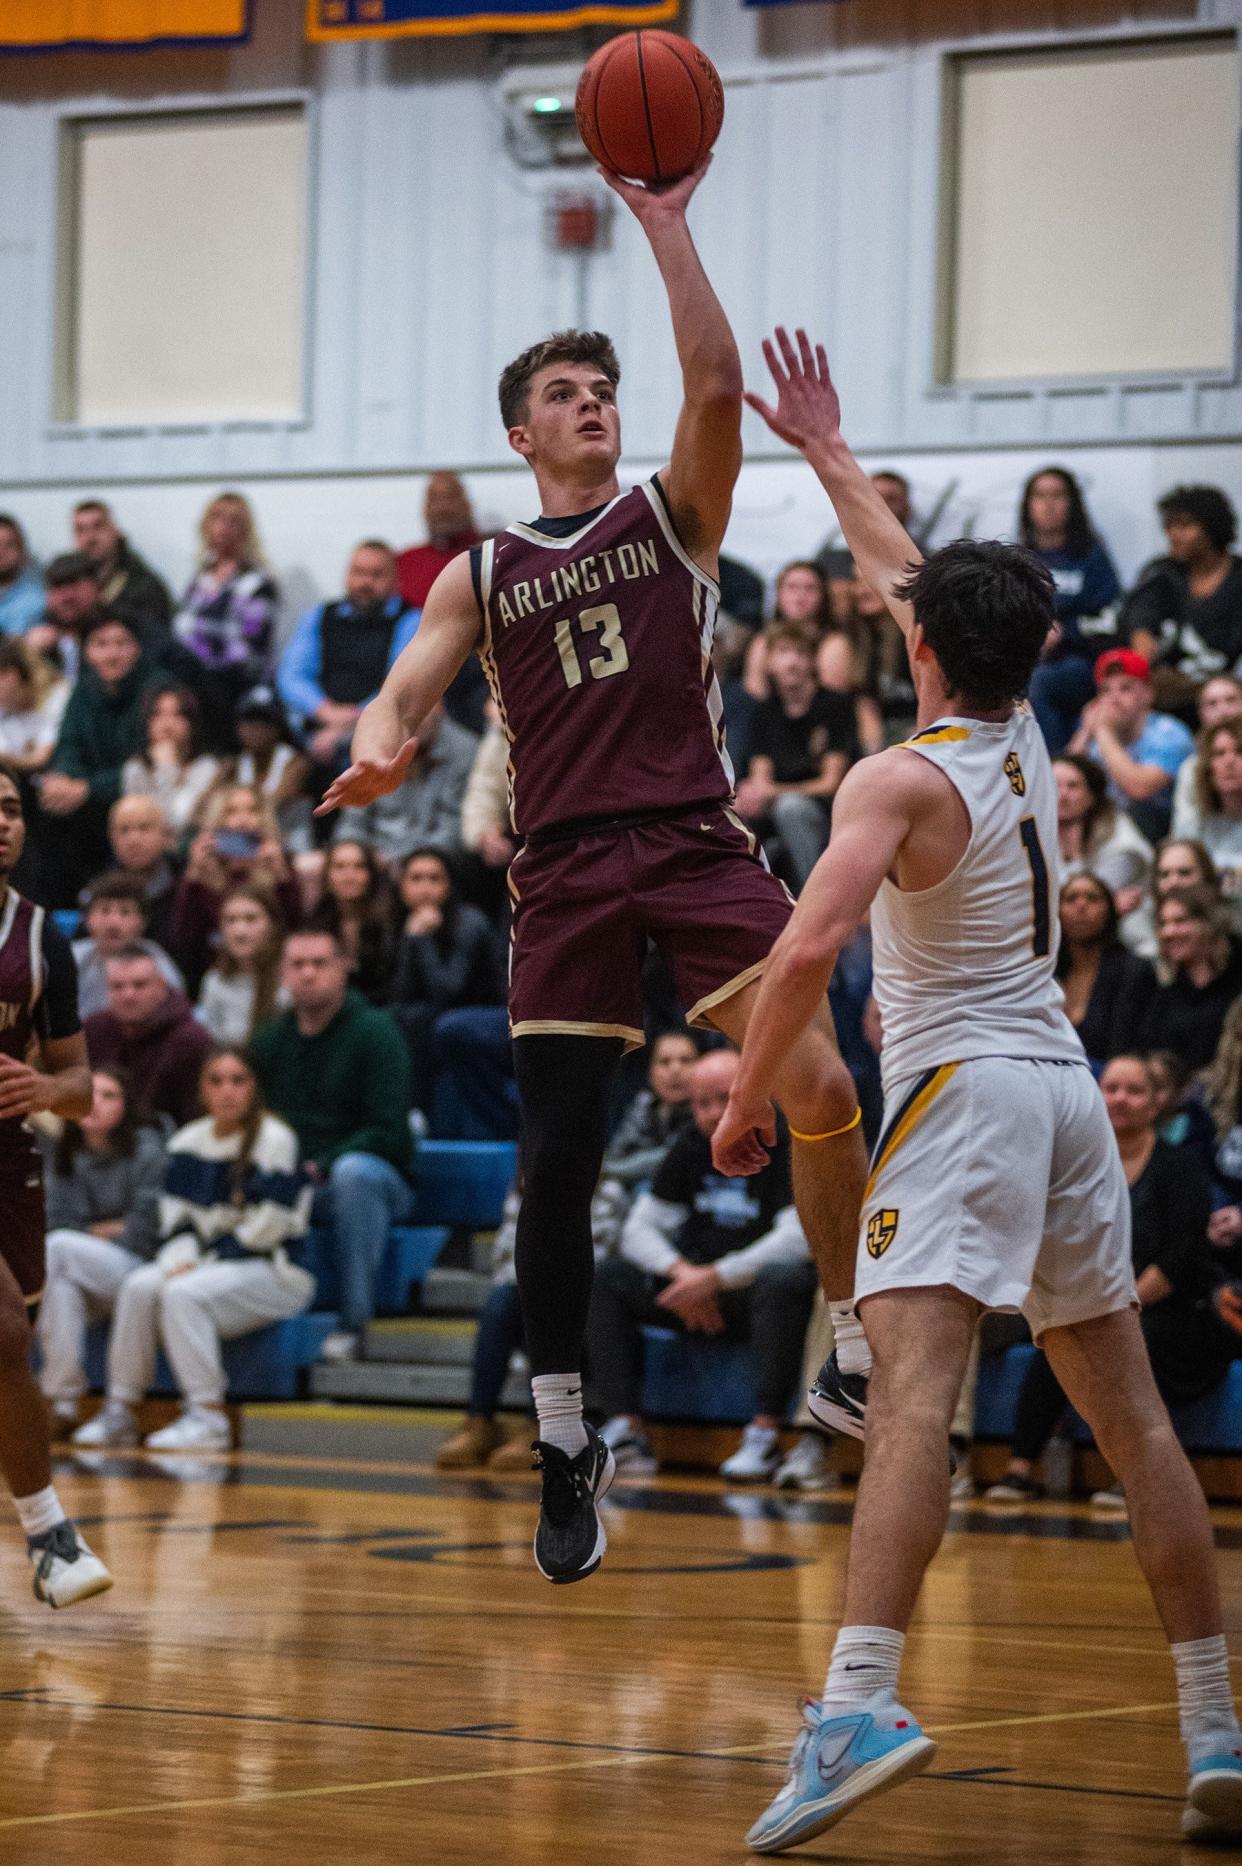 Arlington's Mike Rescigno goes up for a floater against Lourdes' Mike Sabini during the final of the Duane Davis Memorial basketball tournament on Dec. 29, 2023.